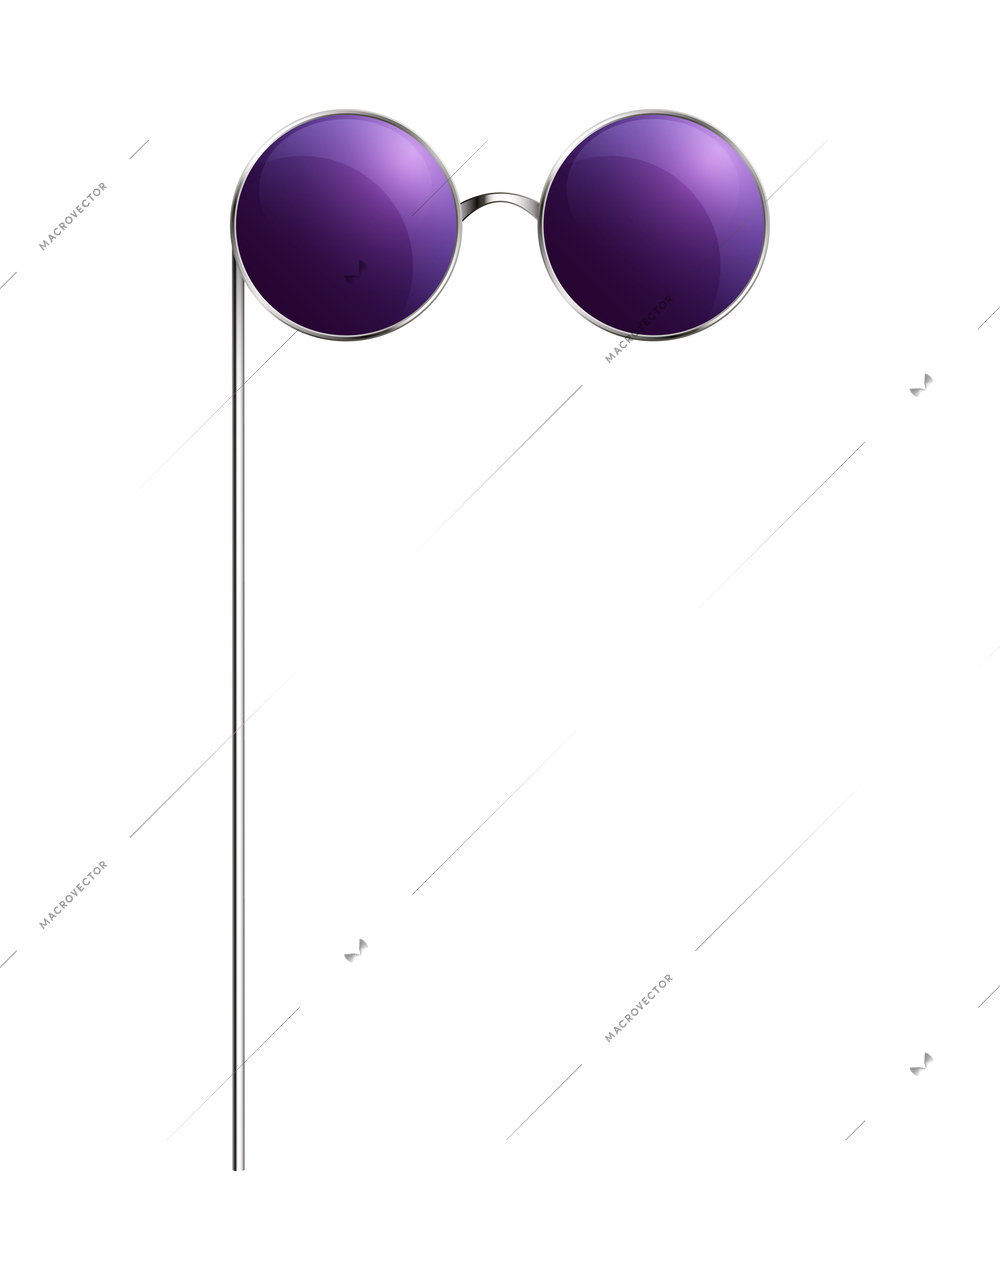 Photo booth party prop violet round glasses realistic vector illustration